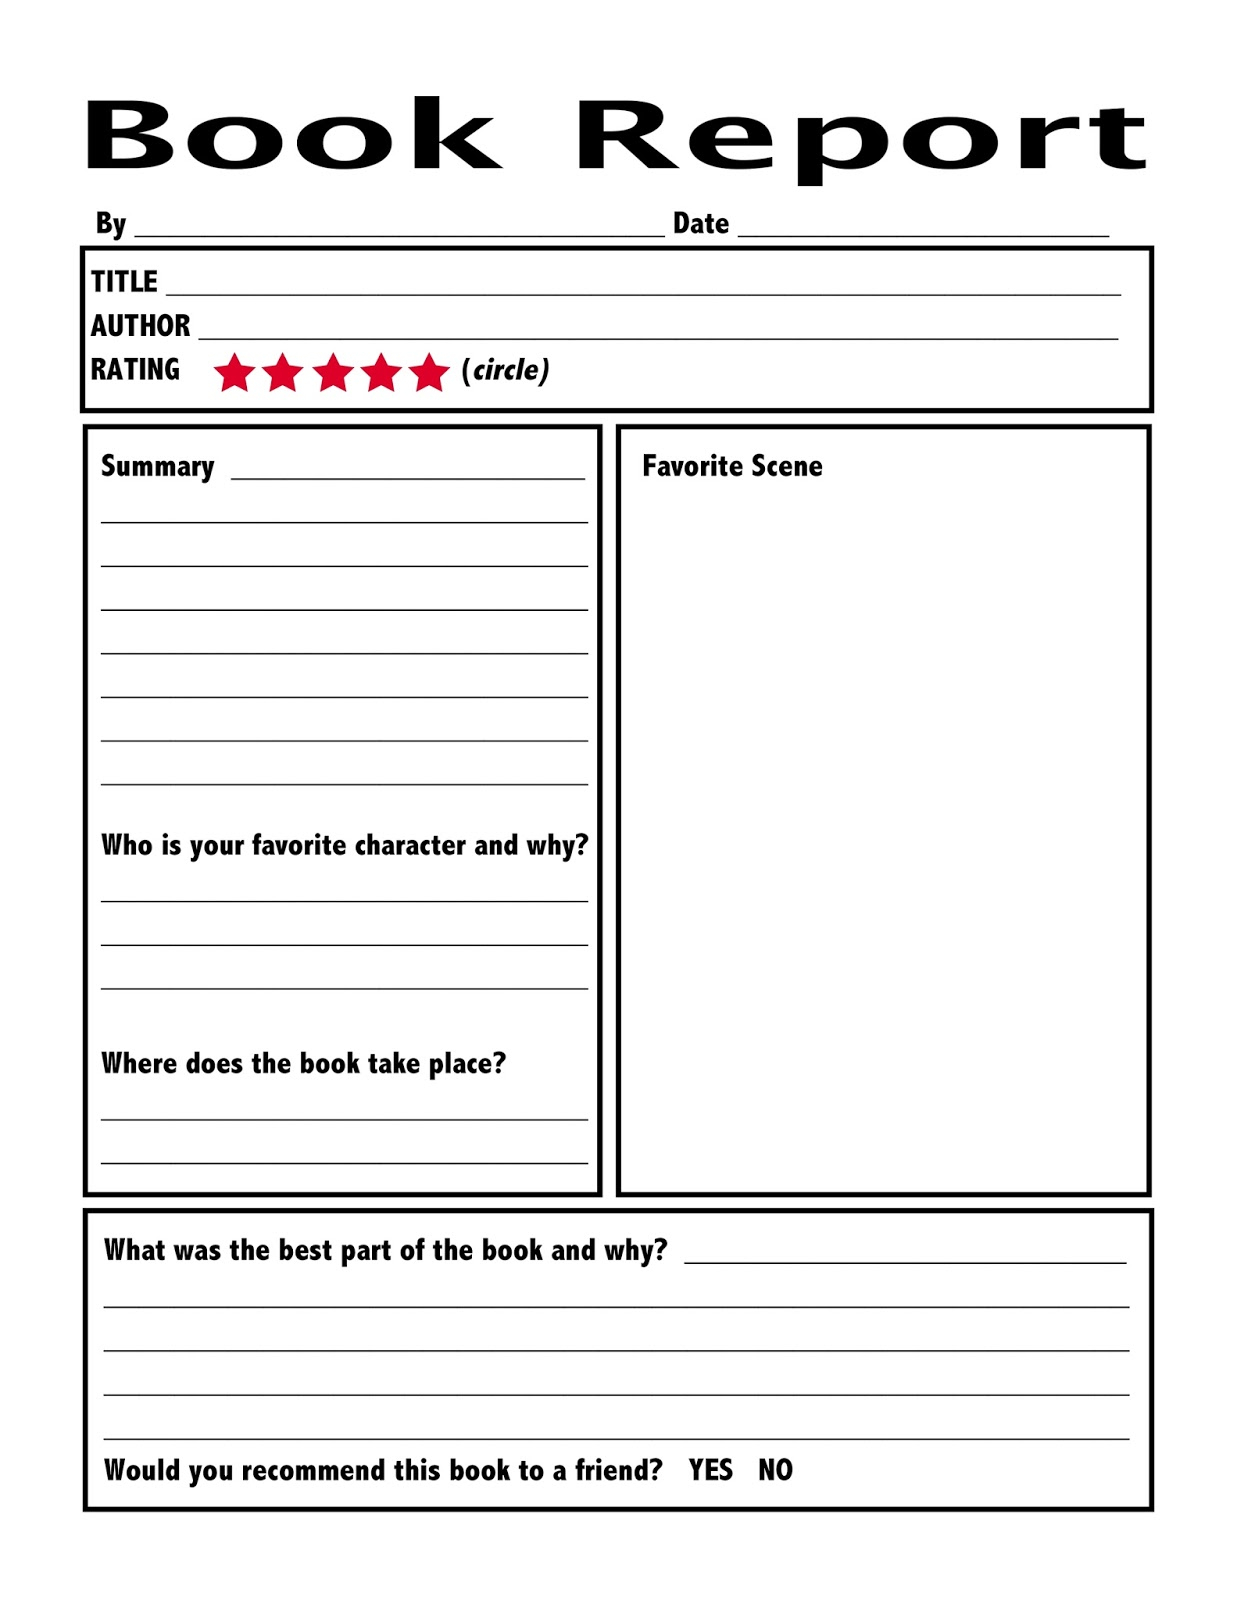 Book Report Writing for Students - Examples, Format, Pdf  Examples For Quick Book Reports Templates